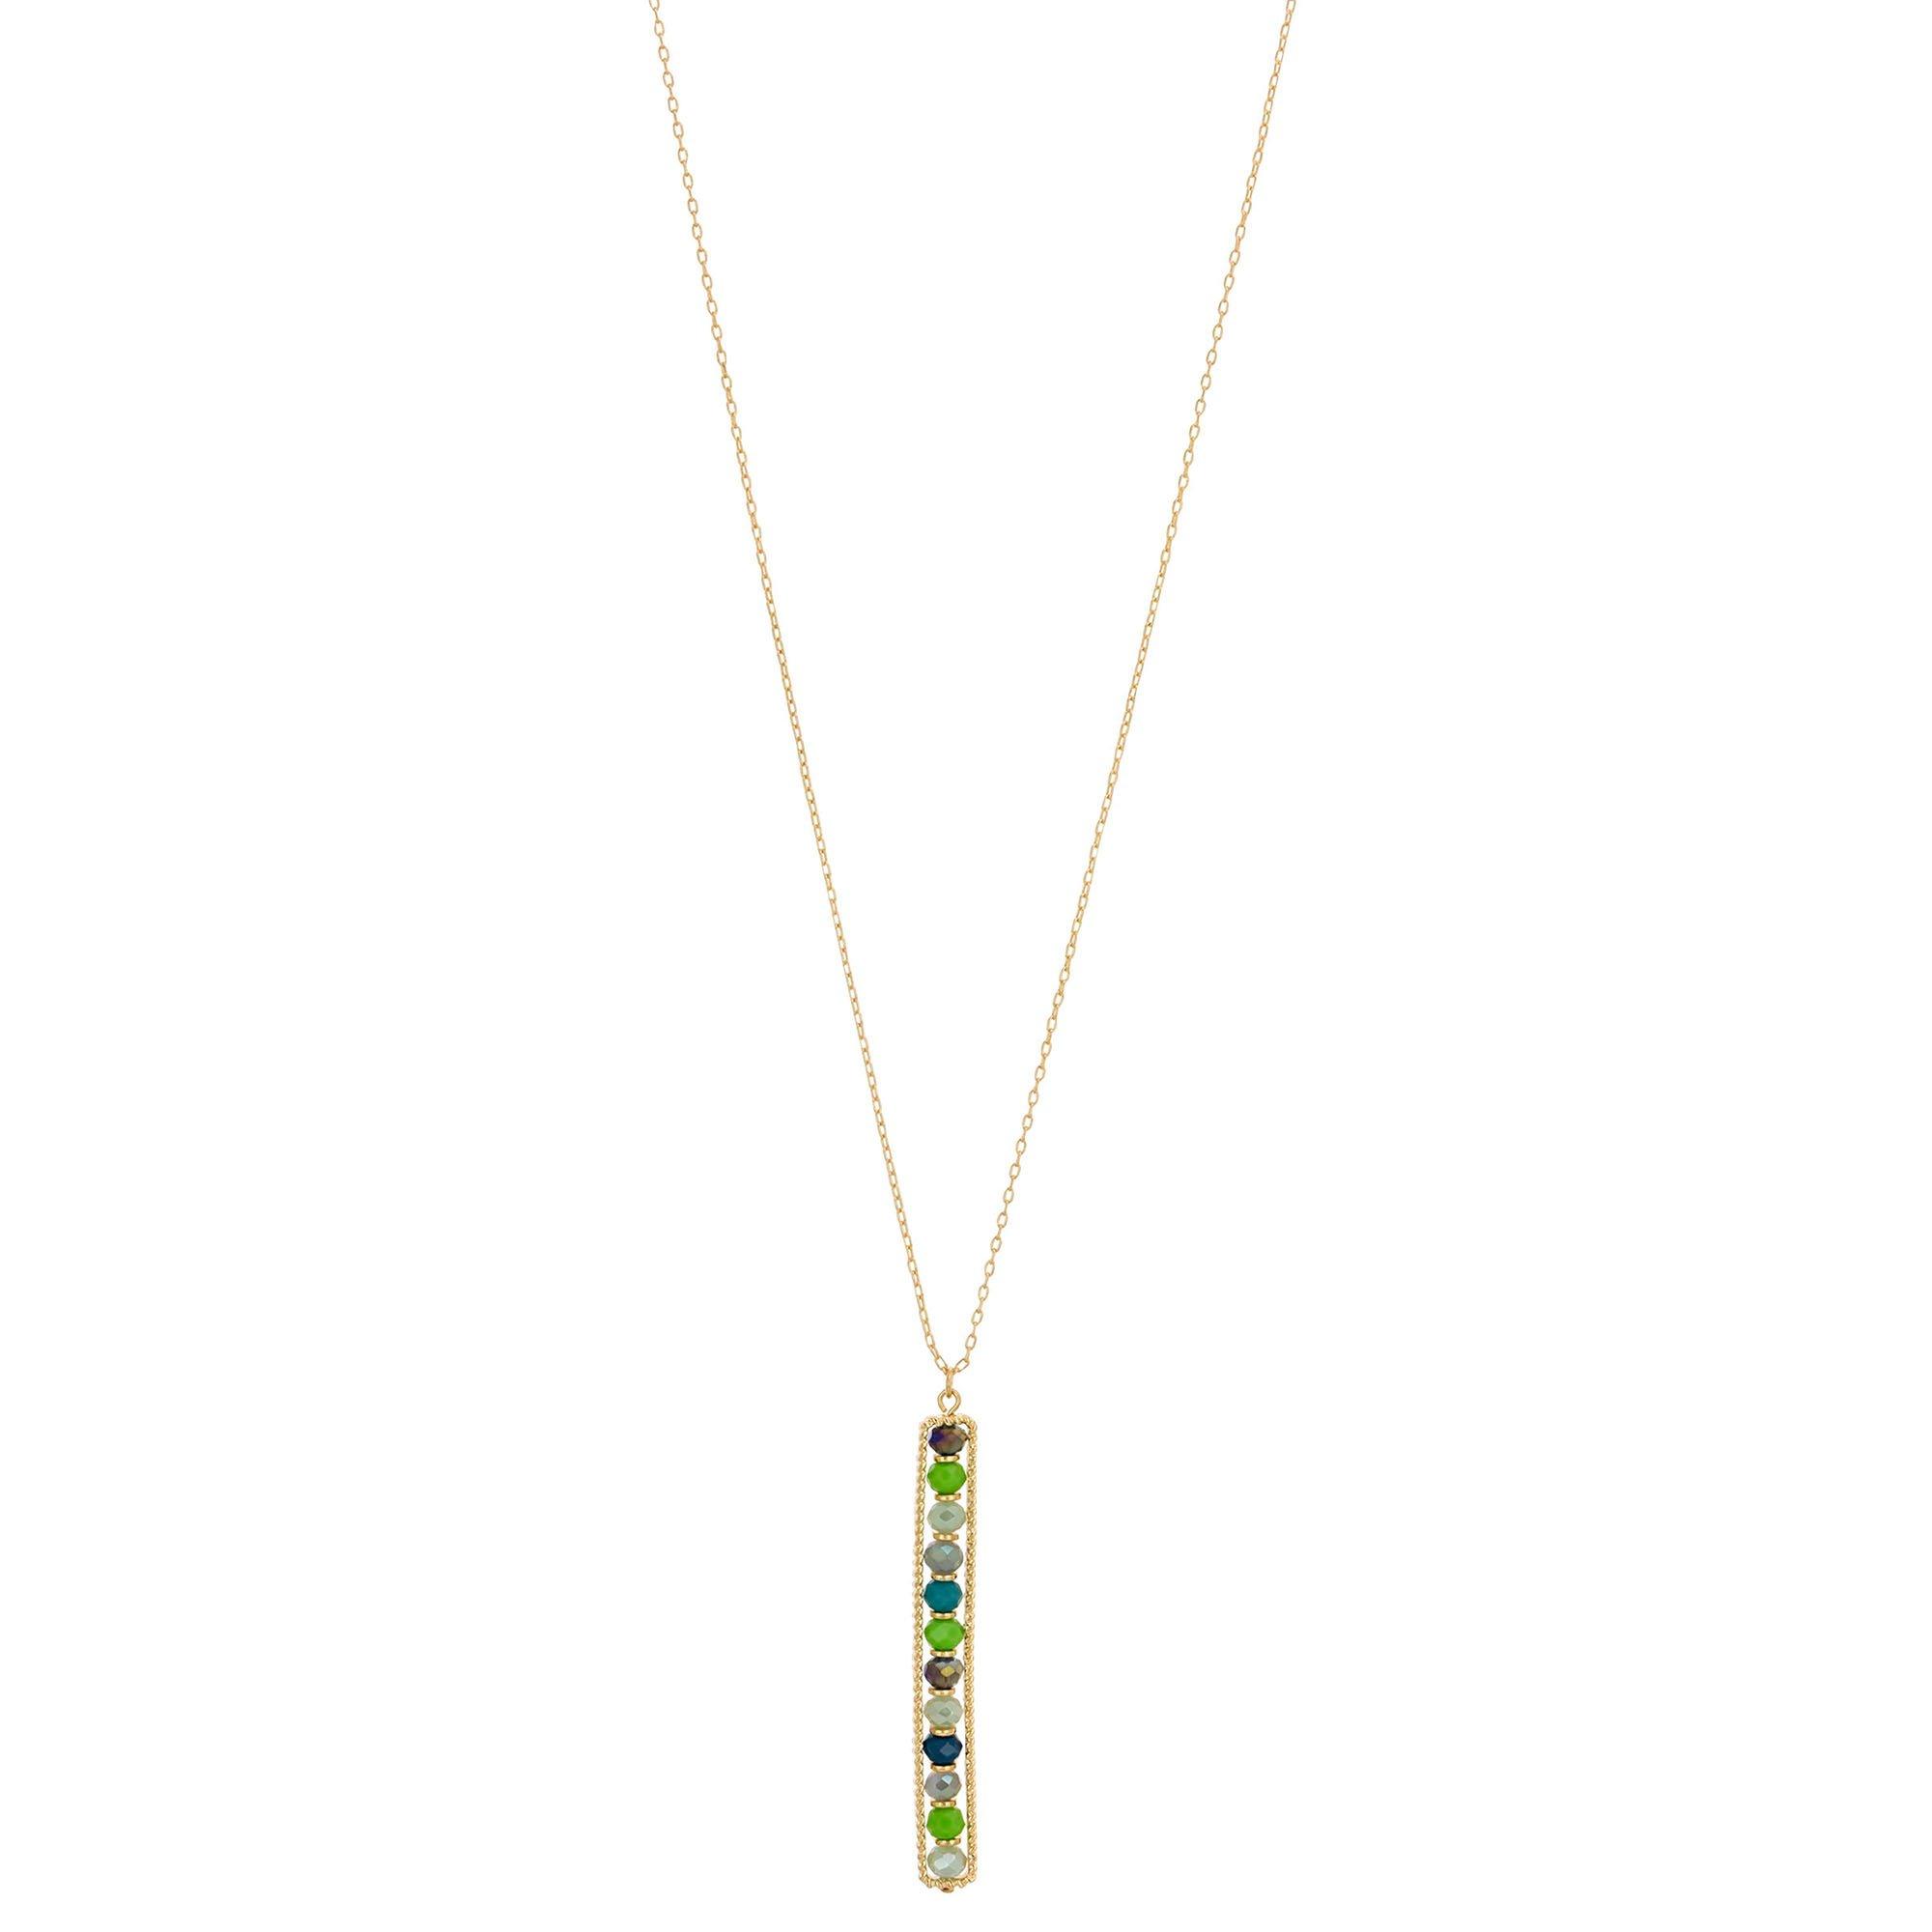 28 In. Beaded Stick Pendant Chain Necklace